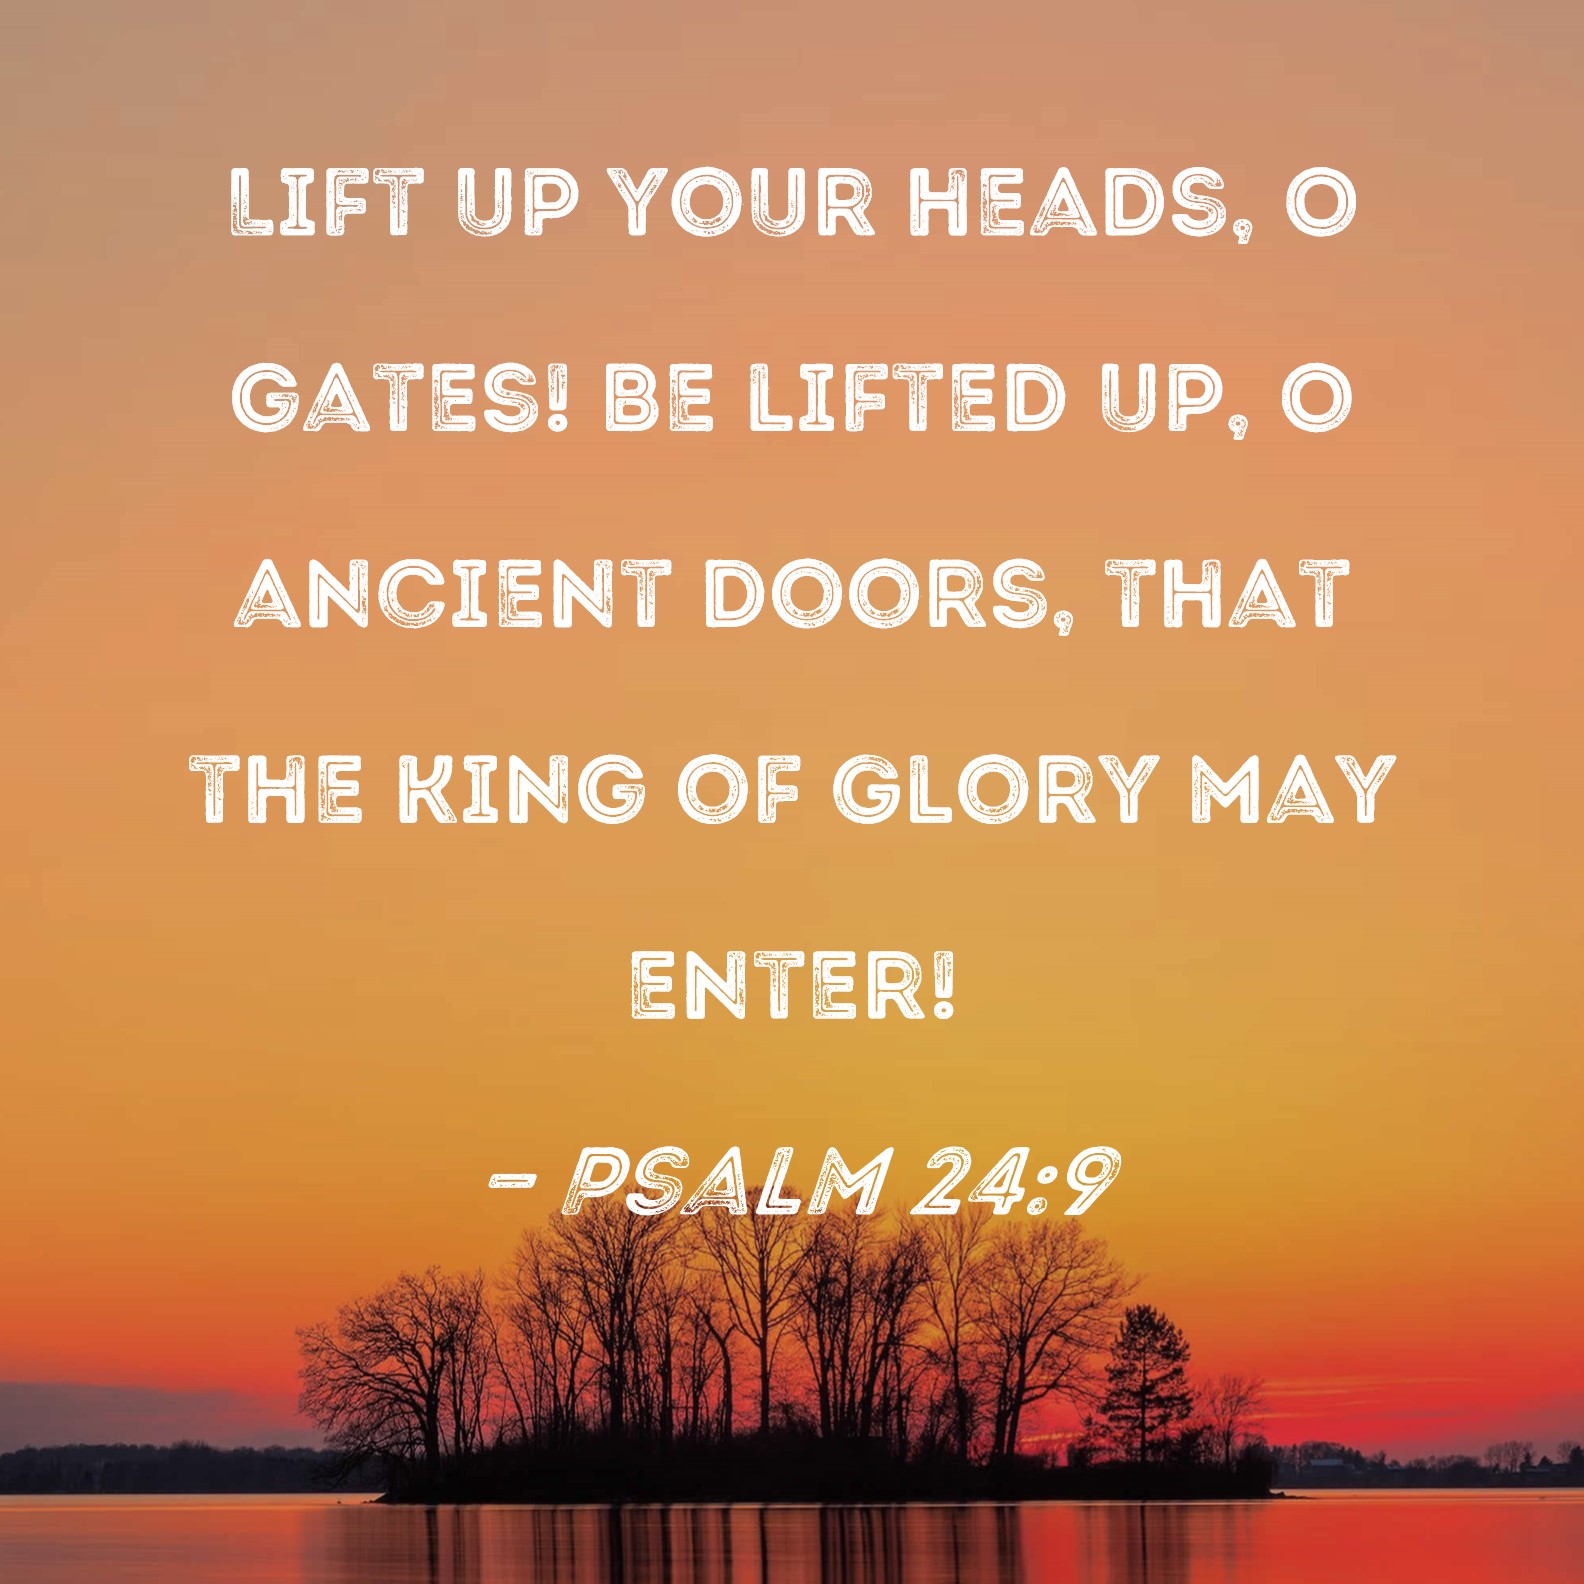 Psalm 24:9 Lift up your heads, O gates! Be lifted up, O ancient